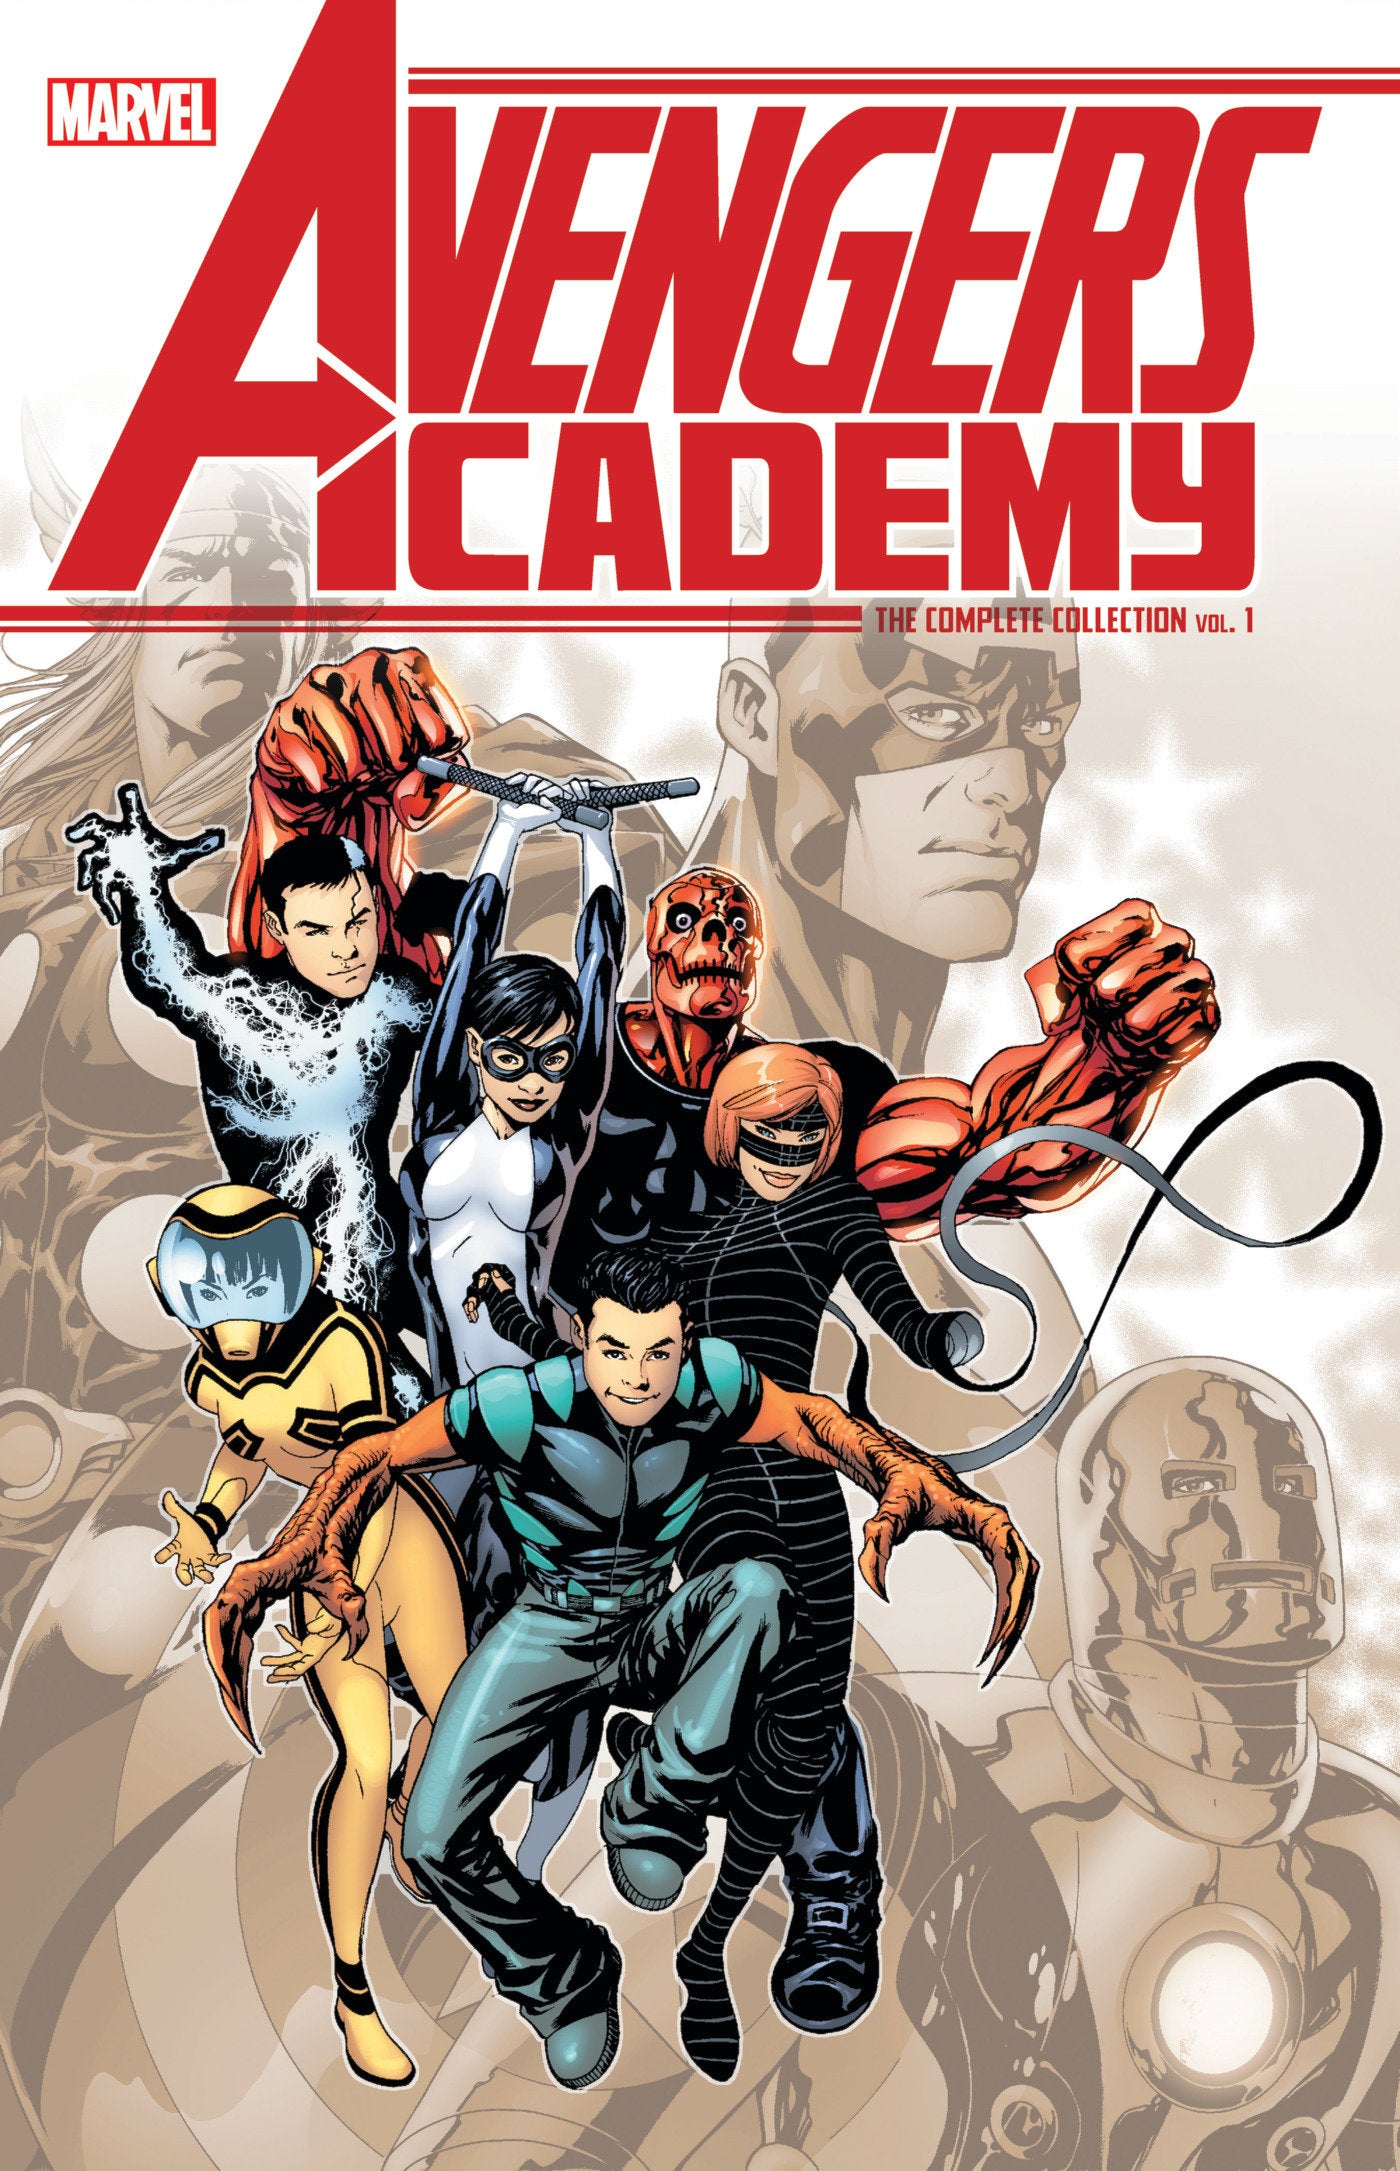 AVENGERS ACADEMY: THE COMPLETE COLLECTION VOL. 1 TRADE PAPERBACK